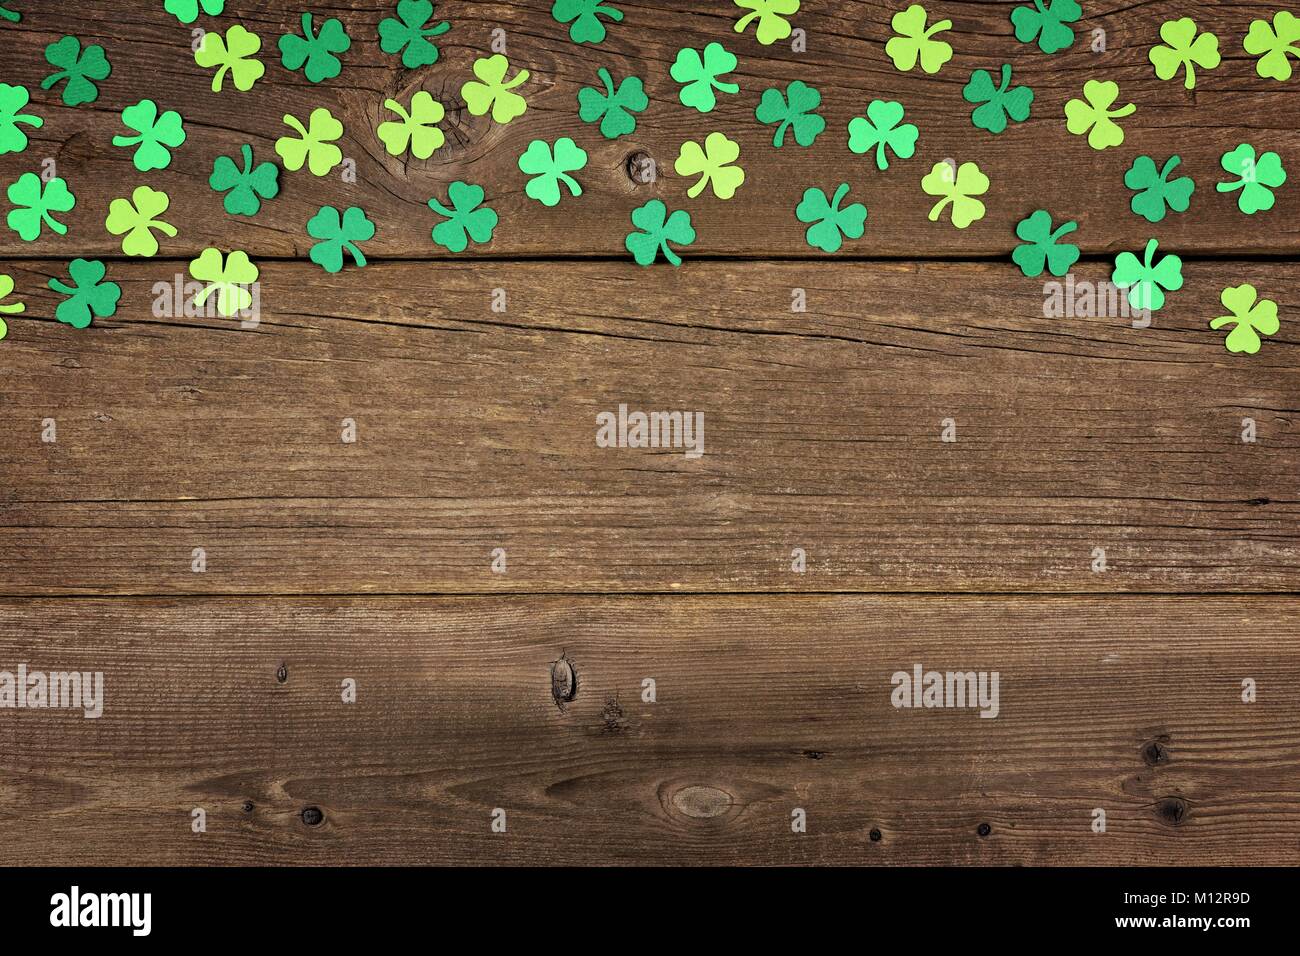 St Patricks Day top border of paper shamrocks over an old rustic wood background Stock Photo